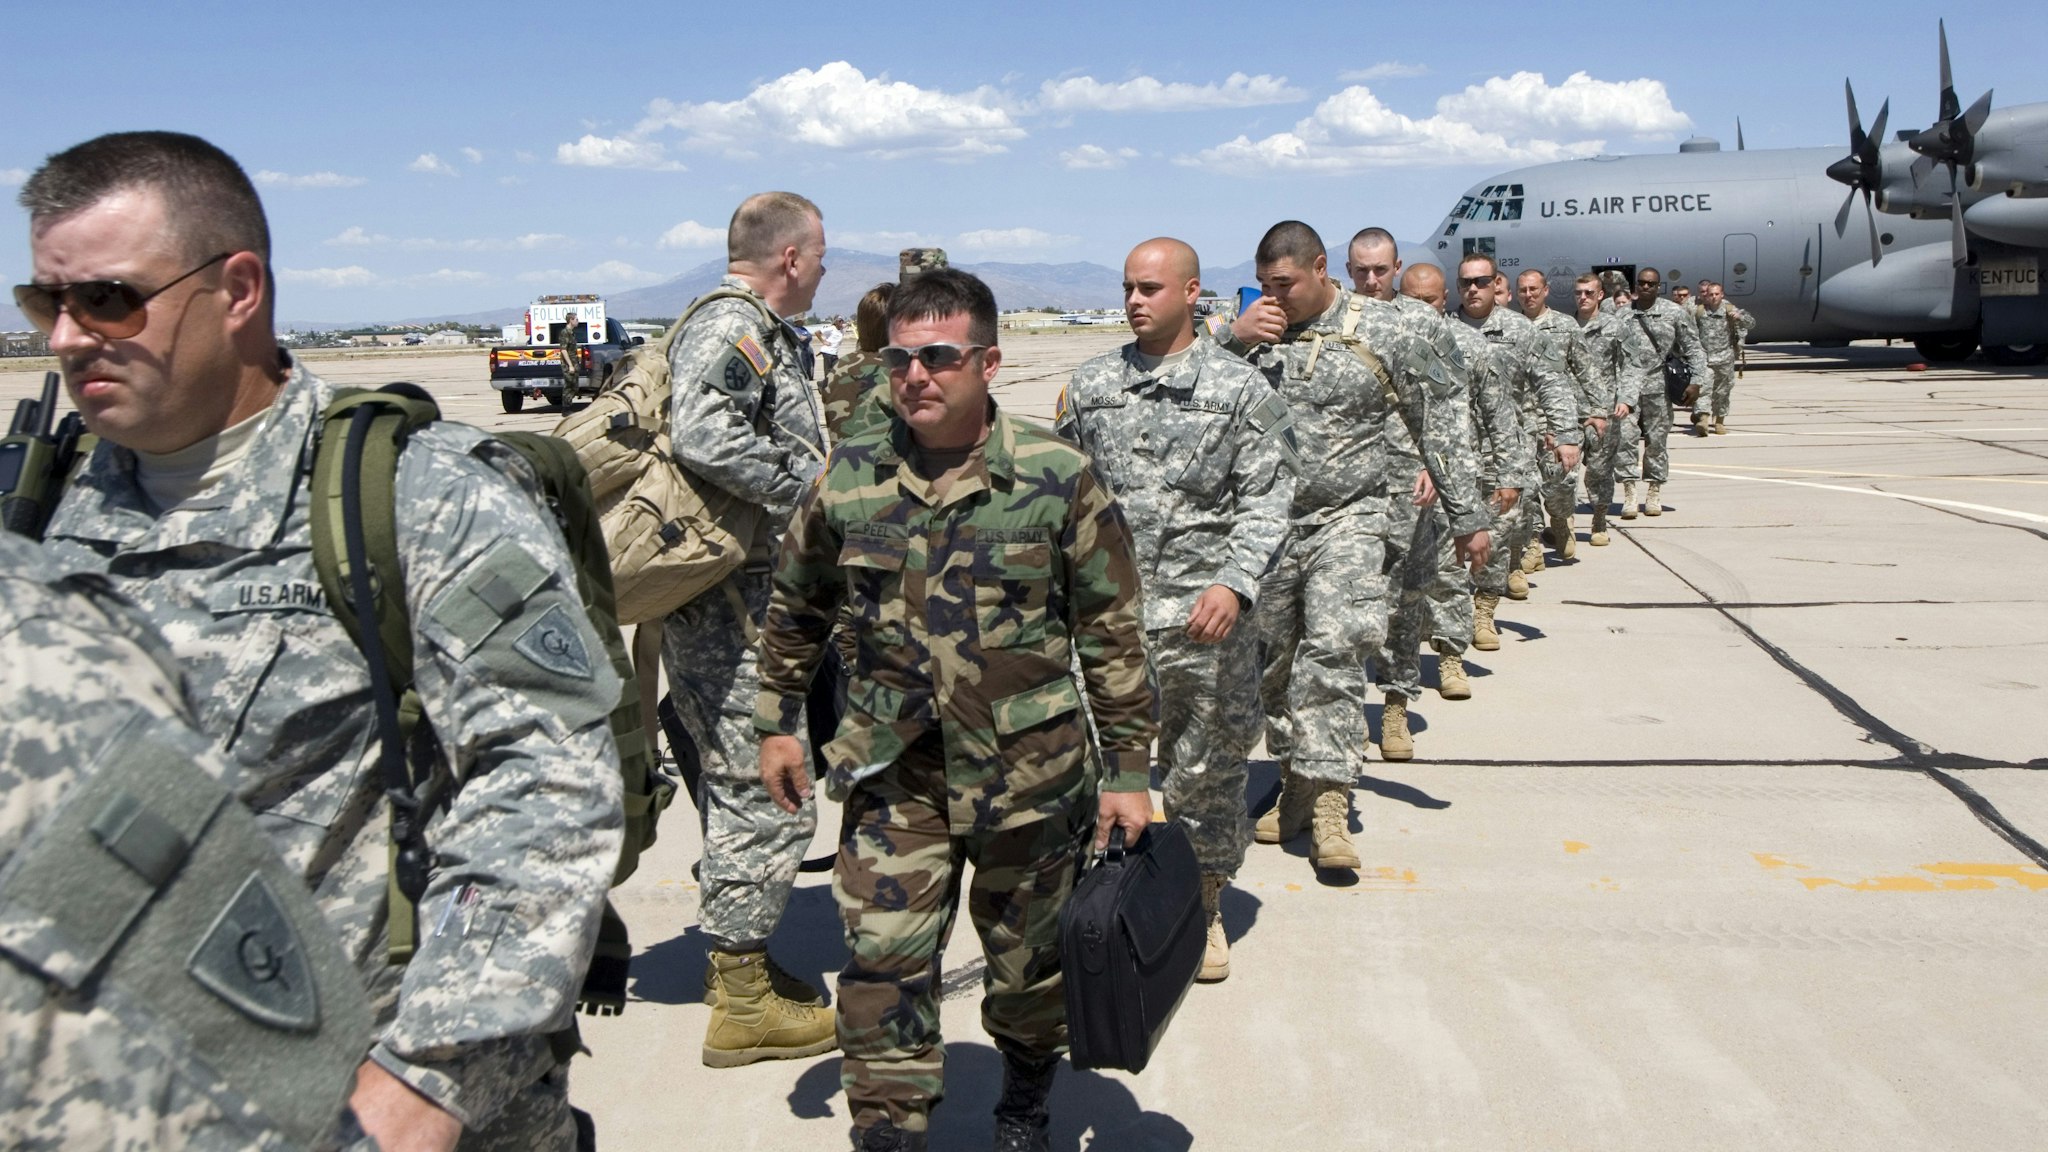 TUCSON, AZ - JULY 11: Members of the Kentucky National Guard 206th Engineer battalion arrive on a C-130 Hercules transport plane July 11, 2006 in Tucson, Arizona. One hundred members of the unit are here in support of Border Patrol agents maintaining the U.S./Mexican border. The two-week mission is part of President Bush's Operation Jump Start, which calls for 700 National Guard troops from around the country to help in securing the border in Arizona. The Kentucky Guard?s mission will be to build roads, fences and temporary vehicle barriers throughout the Tucson and Yuma sectors of the border.